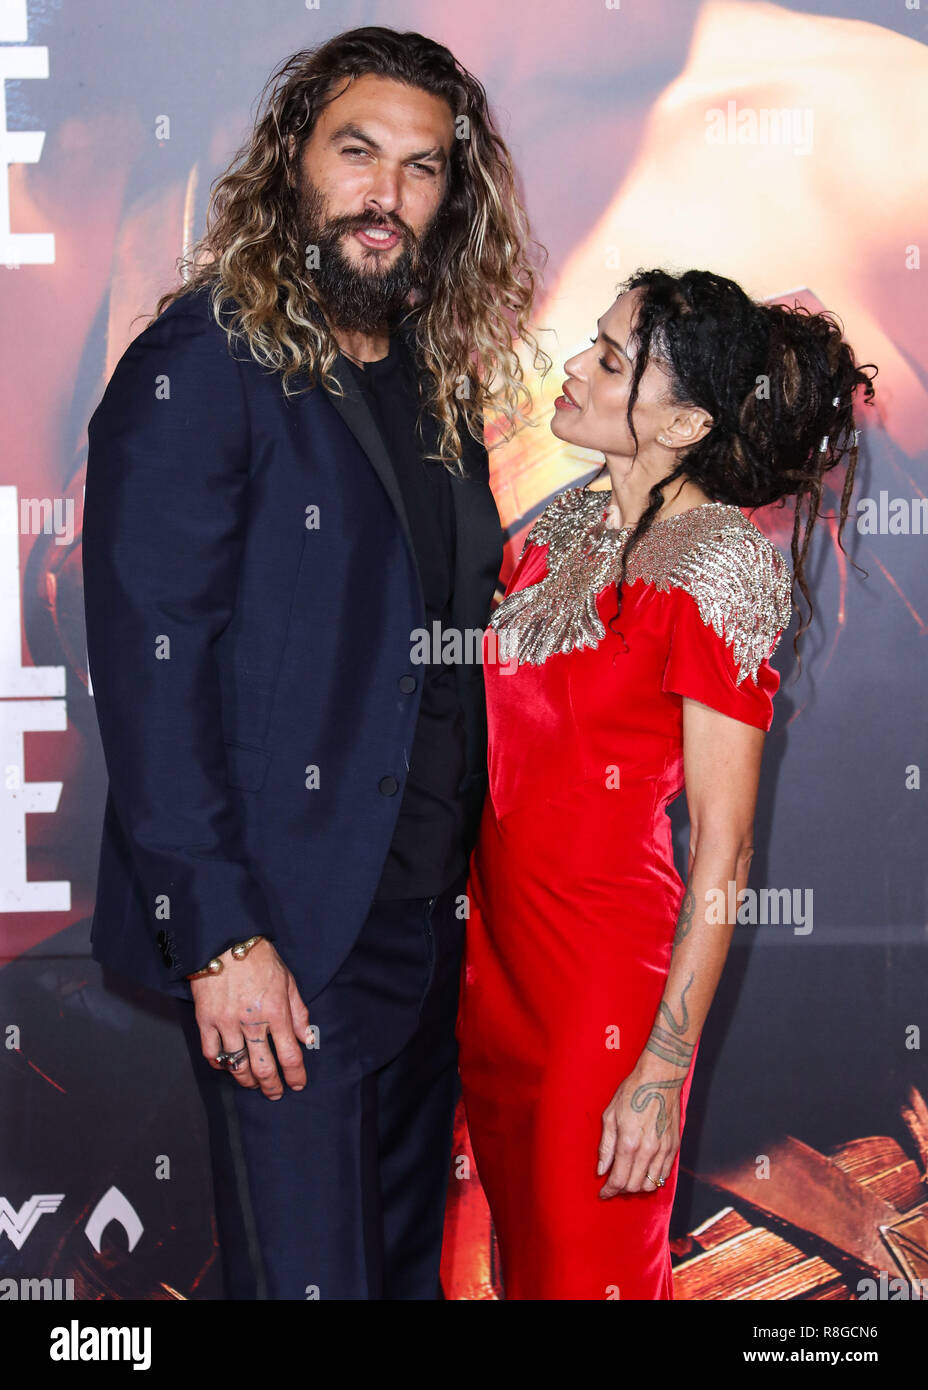 HOLLYWOOD, LOS ANGELES, CA, USA - NOVEMBER 13: Actor Jason Momoa and wife Lisa Bonet arrive at the World Premiere Of Warner Bros. Pictures' 'Justice League' held at the Dolby Theatre on November 13, 2017 in Hollywood, Los Angeles, California, United States. (Photo by Xavier Collin/Image Press Agency) Stock Photo